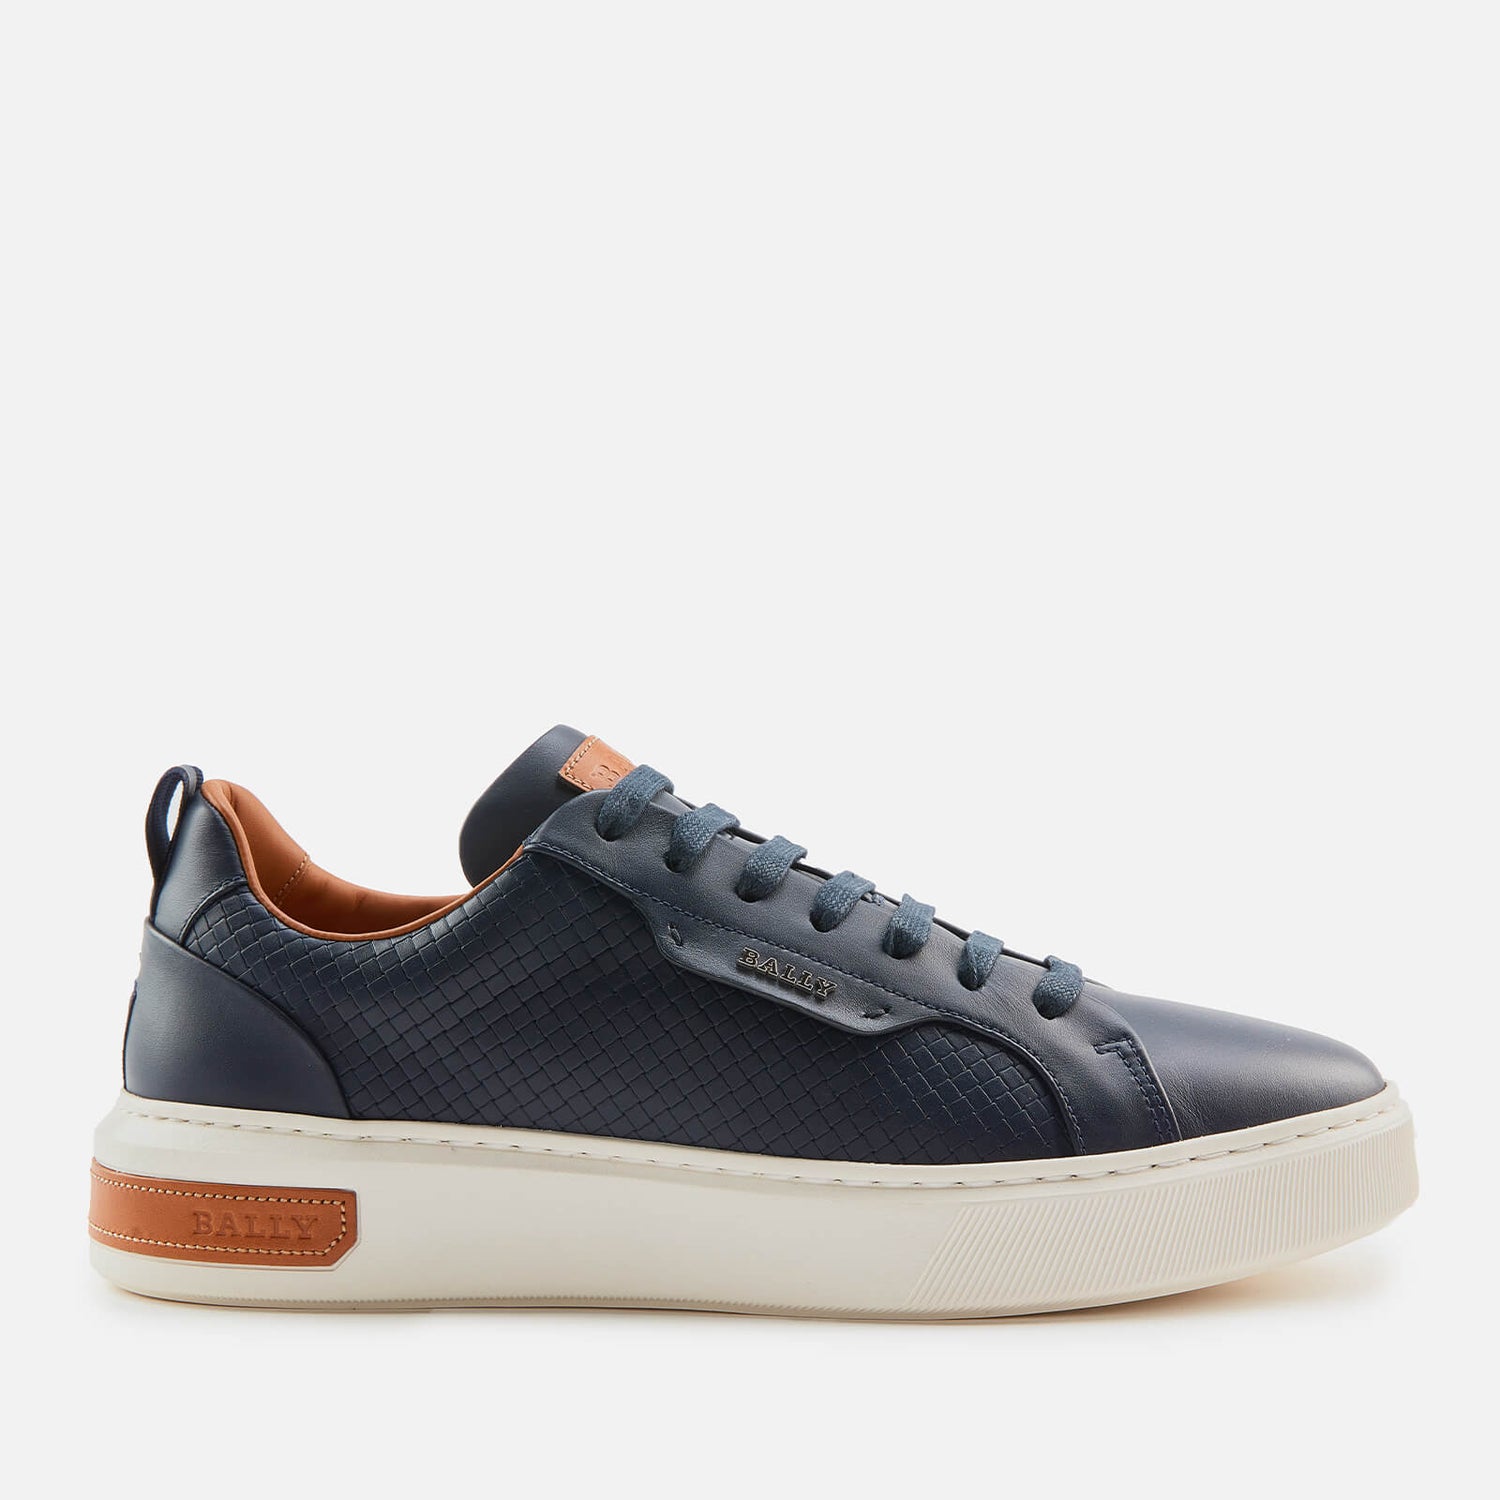 Bally Men's Mickey I Leather Trainers - Ink - Free UK Delivery Available